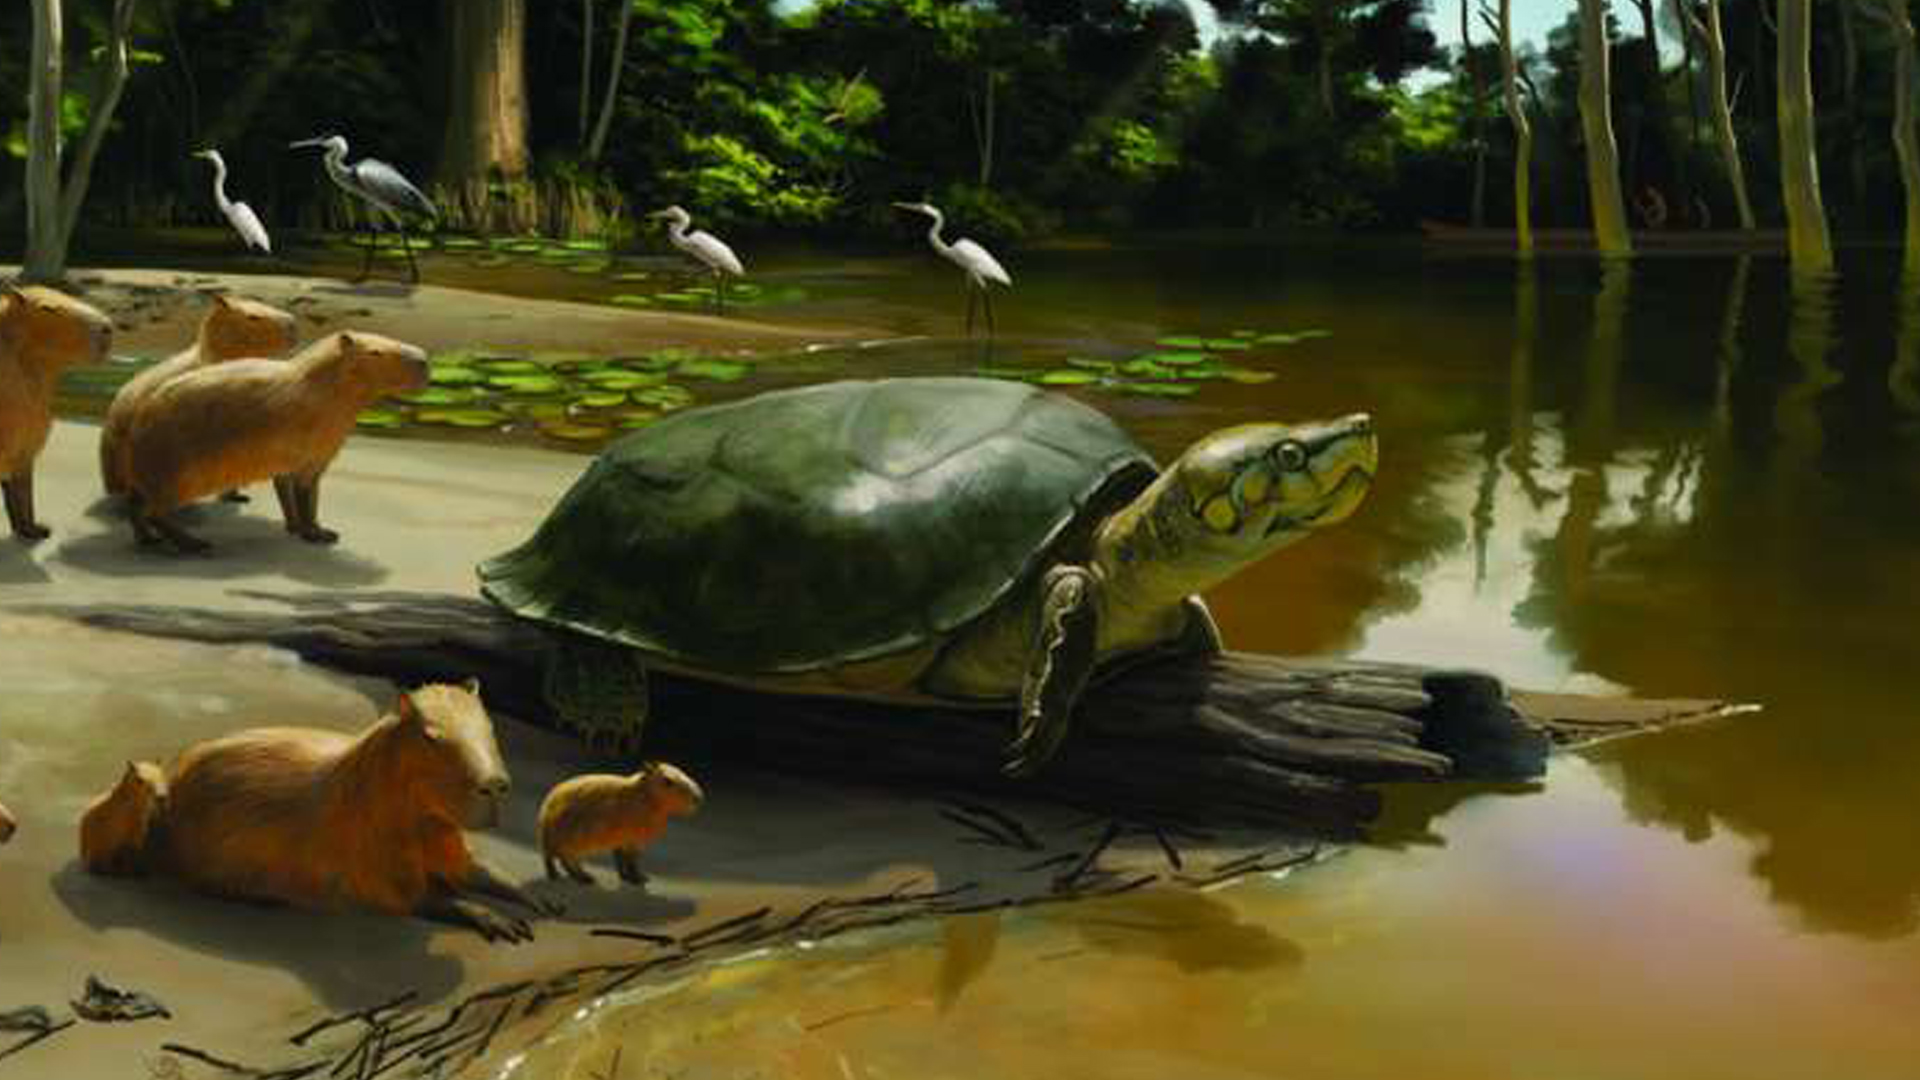 Giant Sofa-Sized Turtle Found by Gold Miners: Possible Human Coexistence Revealed